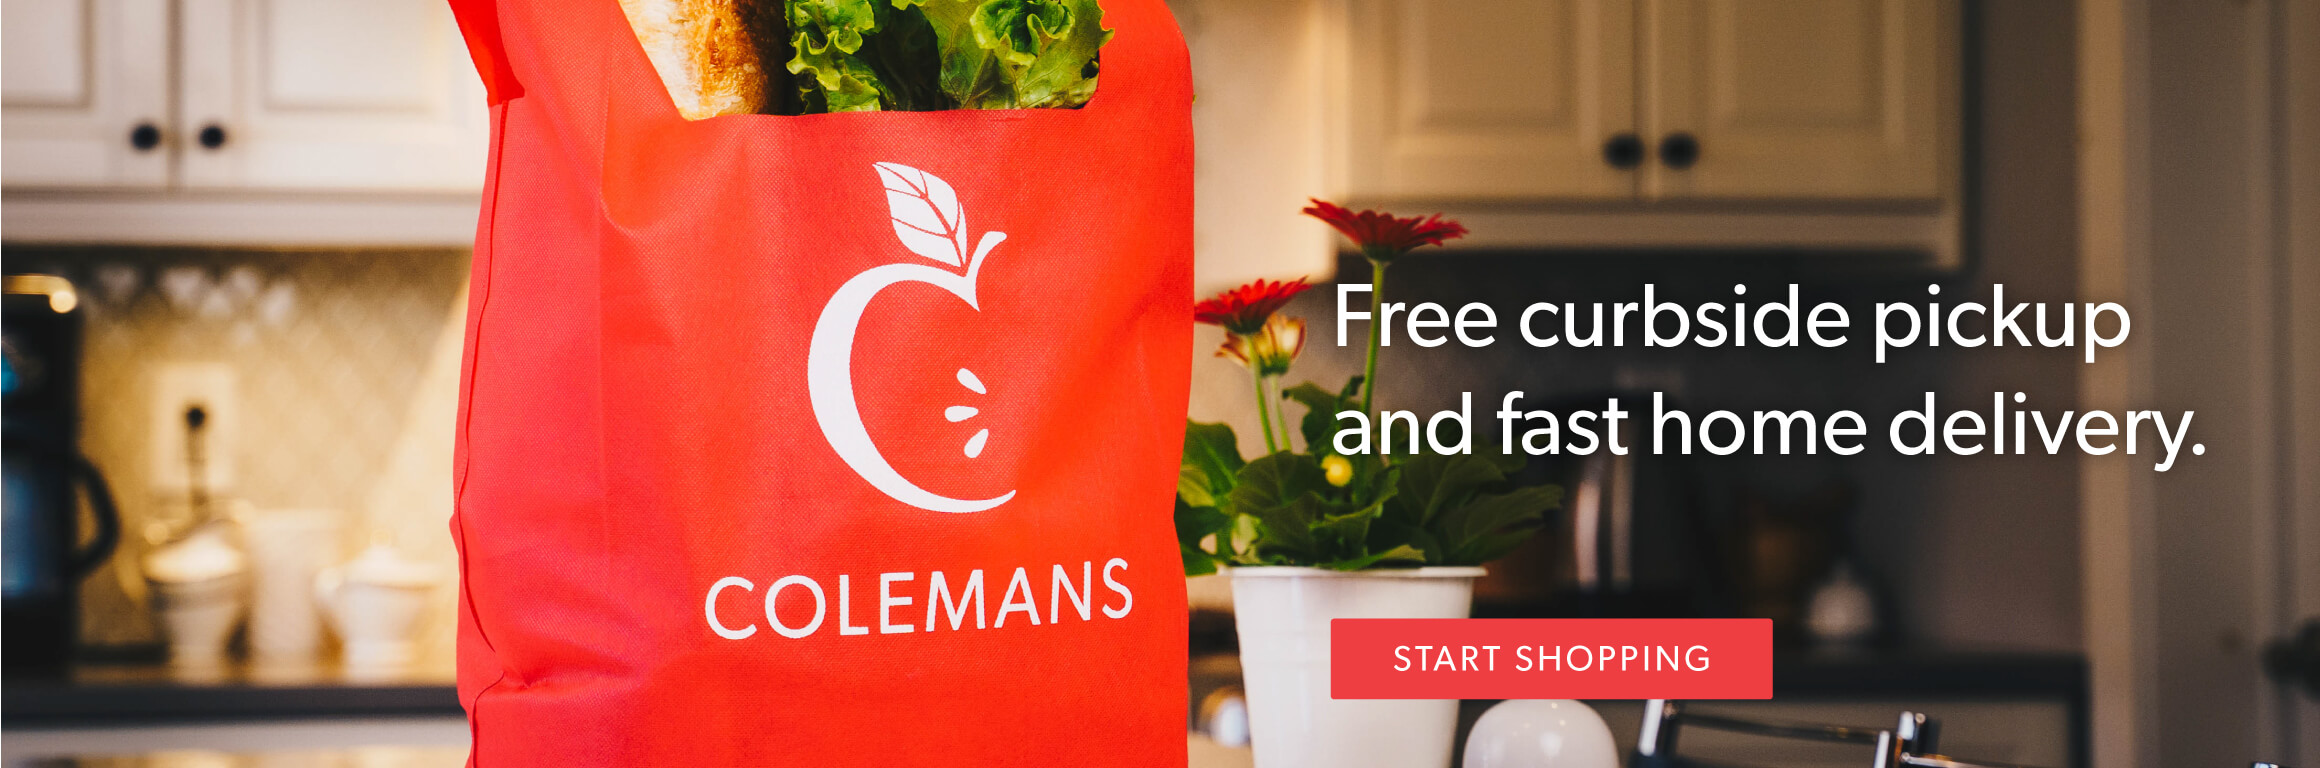 Colemans-Free-Curbside-Pickup-Fast-Delivery